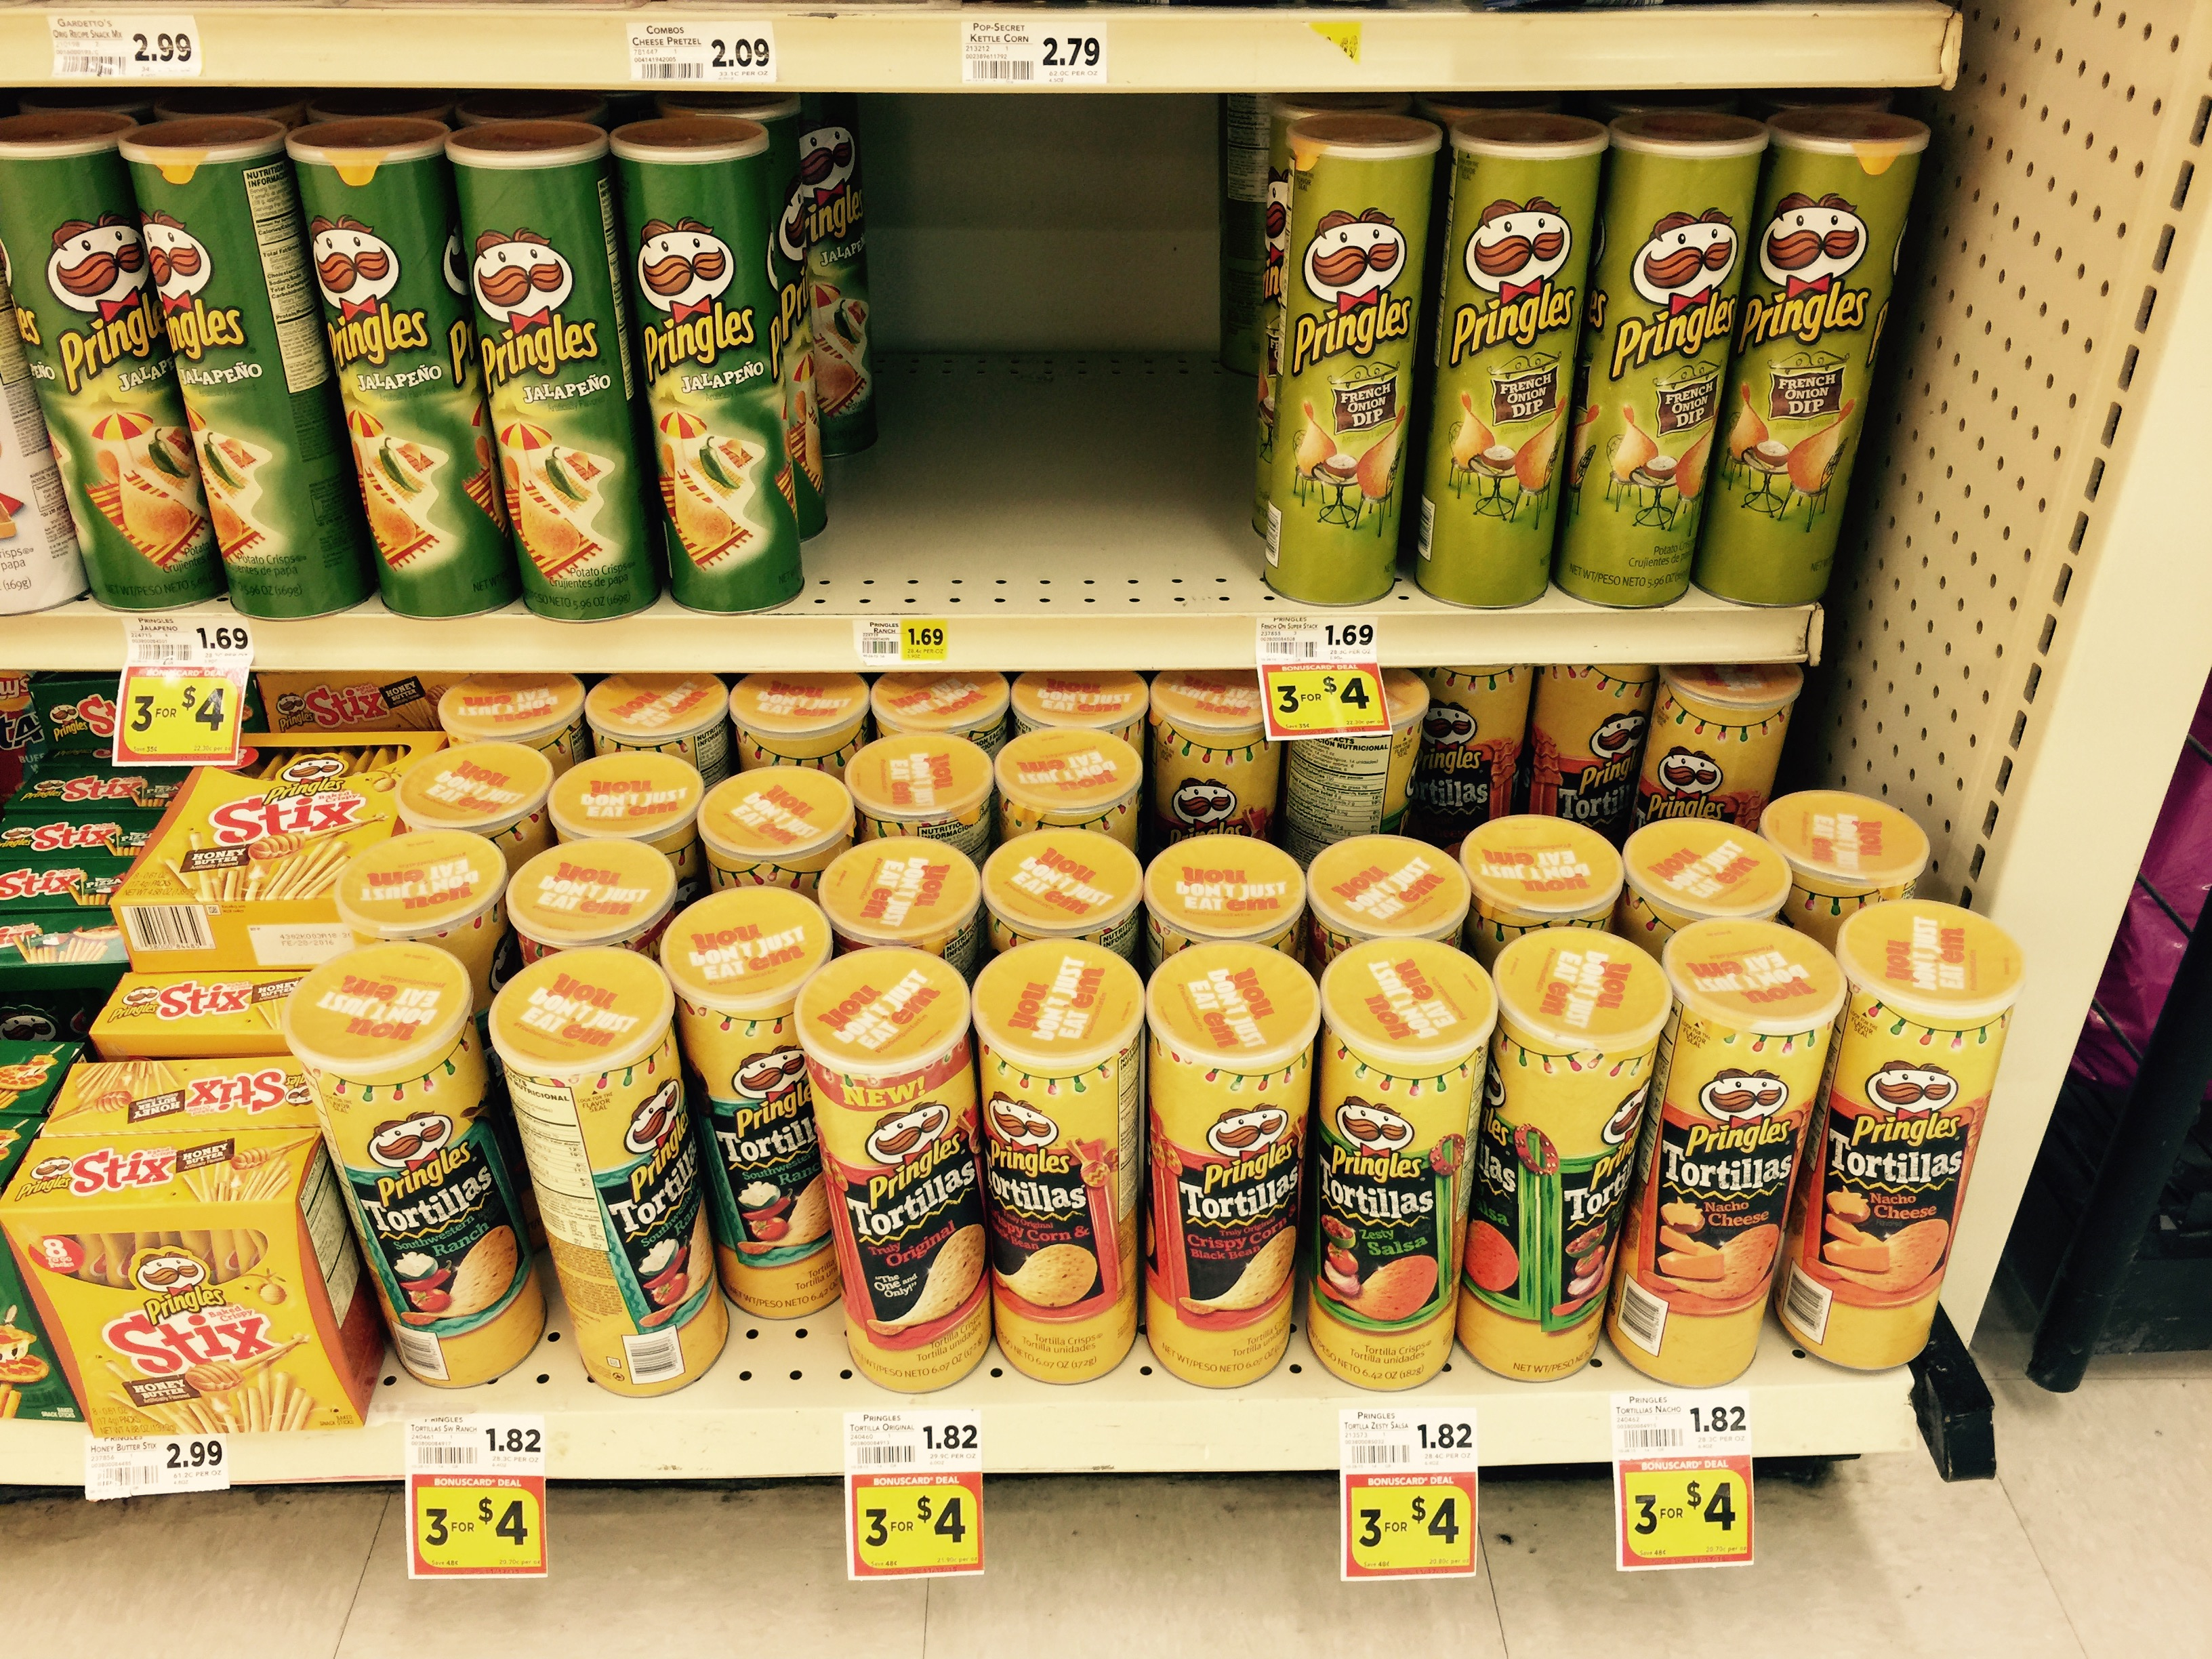 Rare Buy One Get One Free Pringles Coupon - The Harris Teeter Deals - Free Printable Pringles Coupons